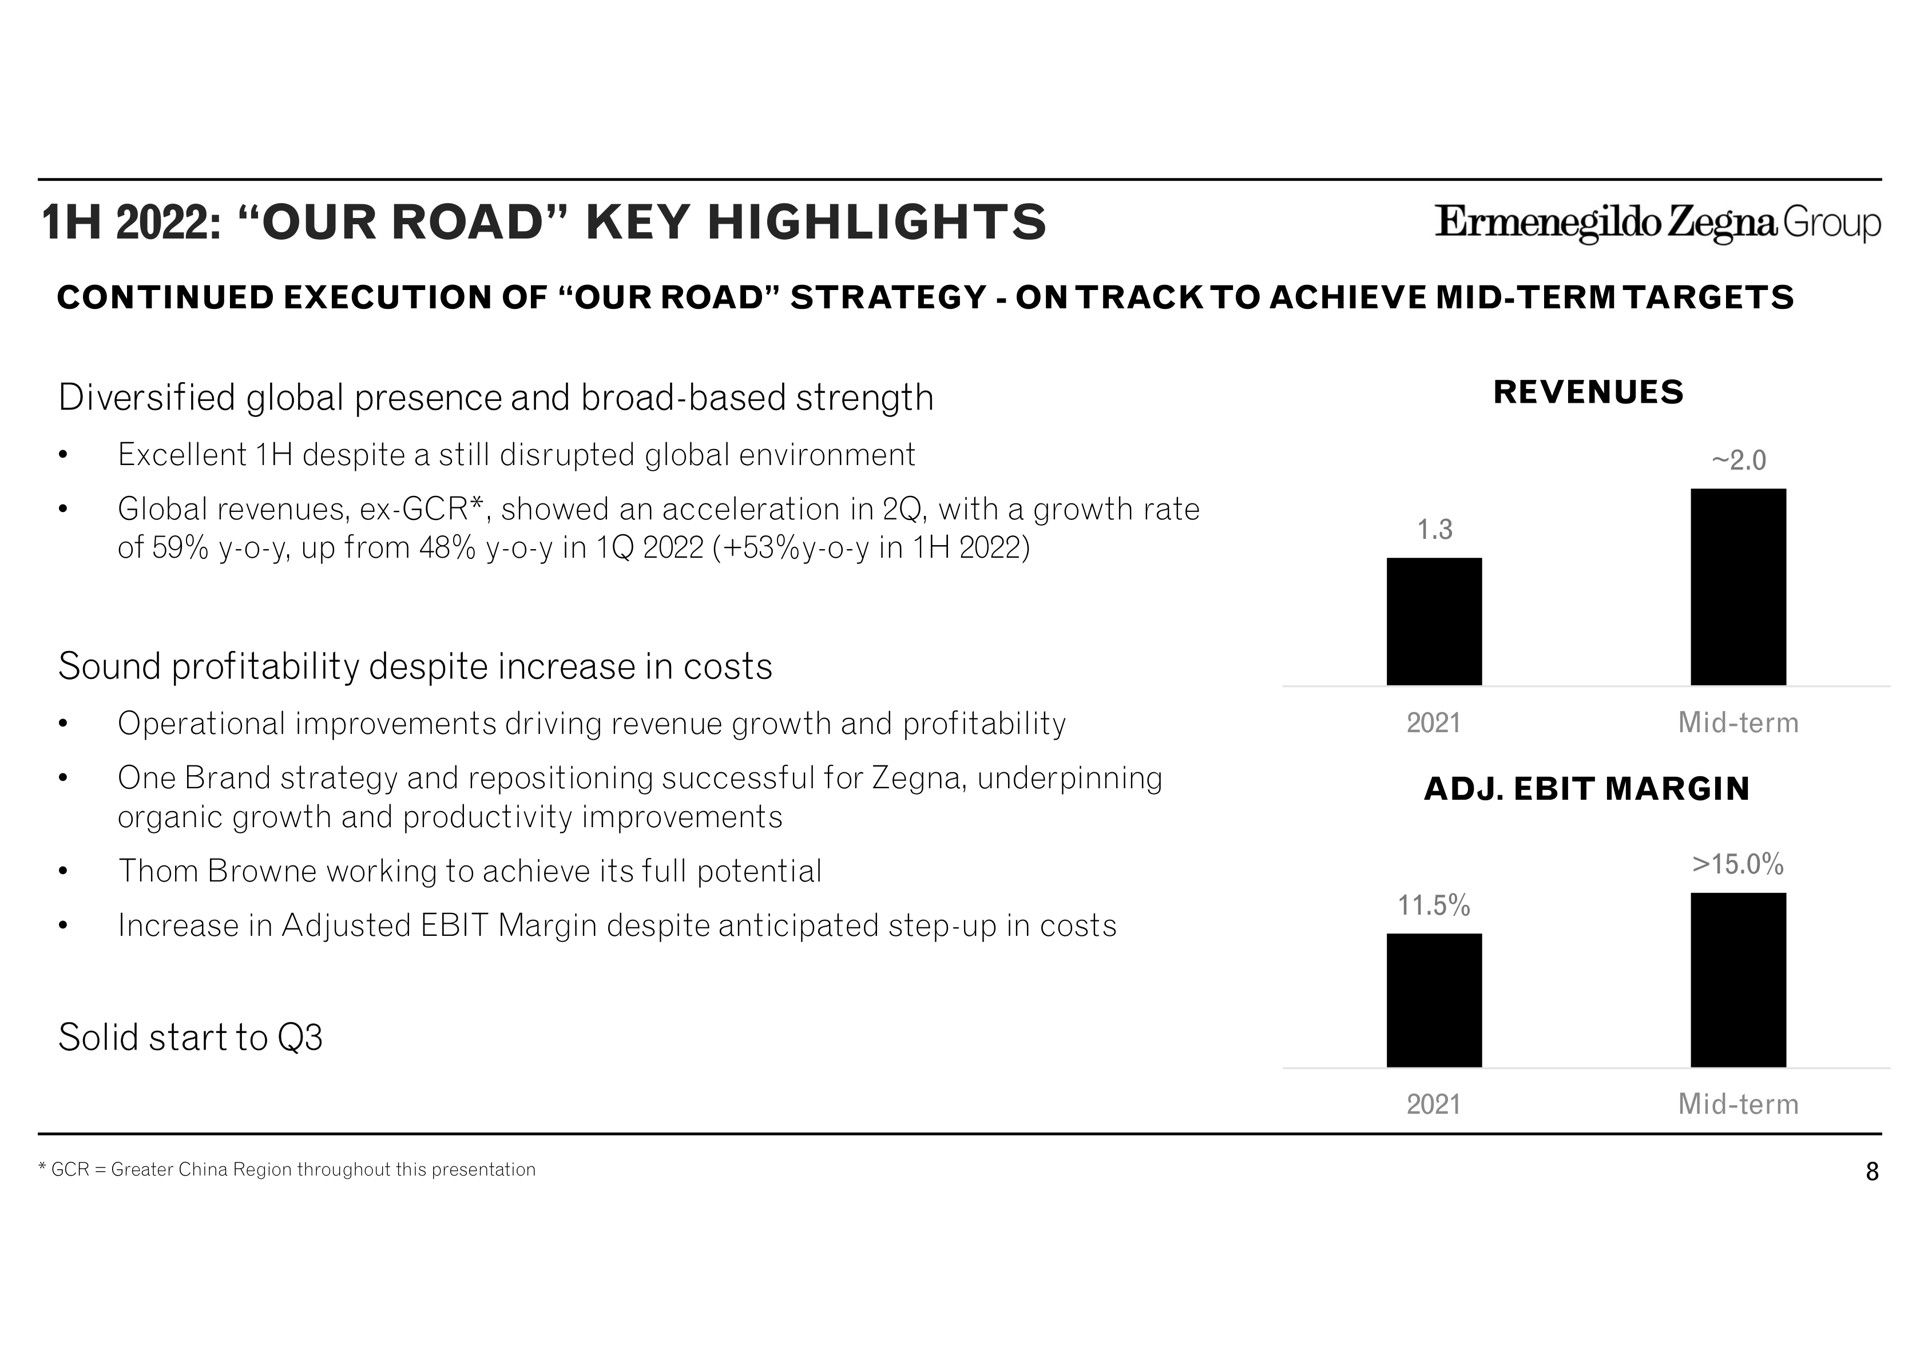 our road key highlights continued execution of our road strategy on track to achieve mid term targets diversified global presence and broad based strength excellent despite a still disrupted global environment global revenues showed an acceleration in with a growth rate of up from in in sound profitability despite increase in costs operational improvements driving revenue growth and profitability one brand strategy and repositioning successful for underpinning organic growth and productivity improvements working to achieve its full potential increase in adjusted margin despite anticipated step up in costs solid start to group i mid tern greater china region throughout this presentation mid | Zegna